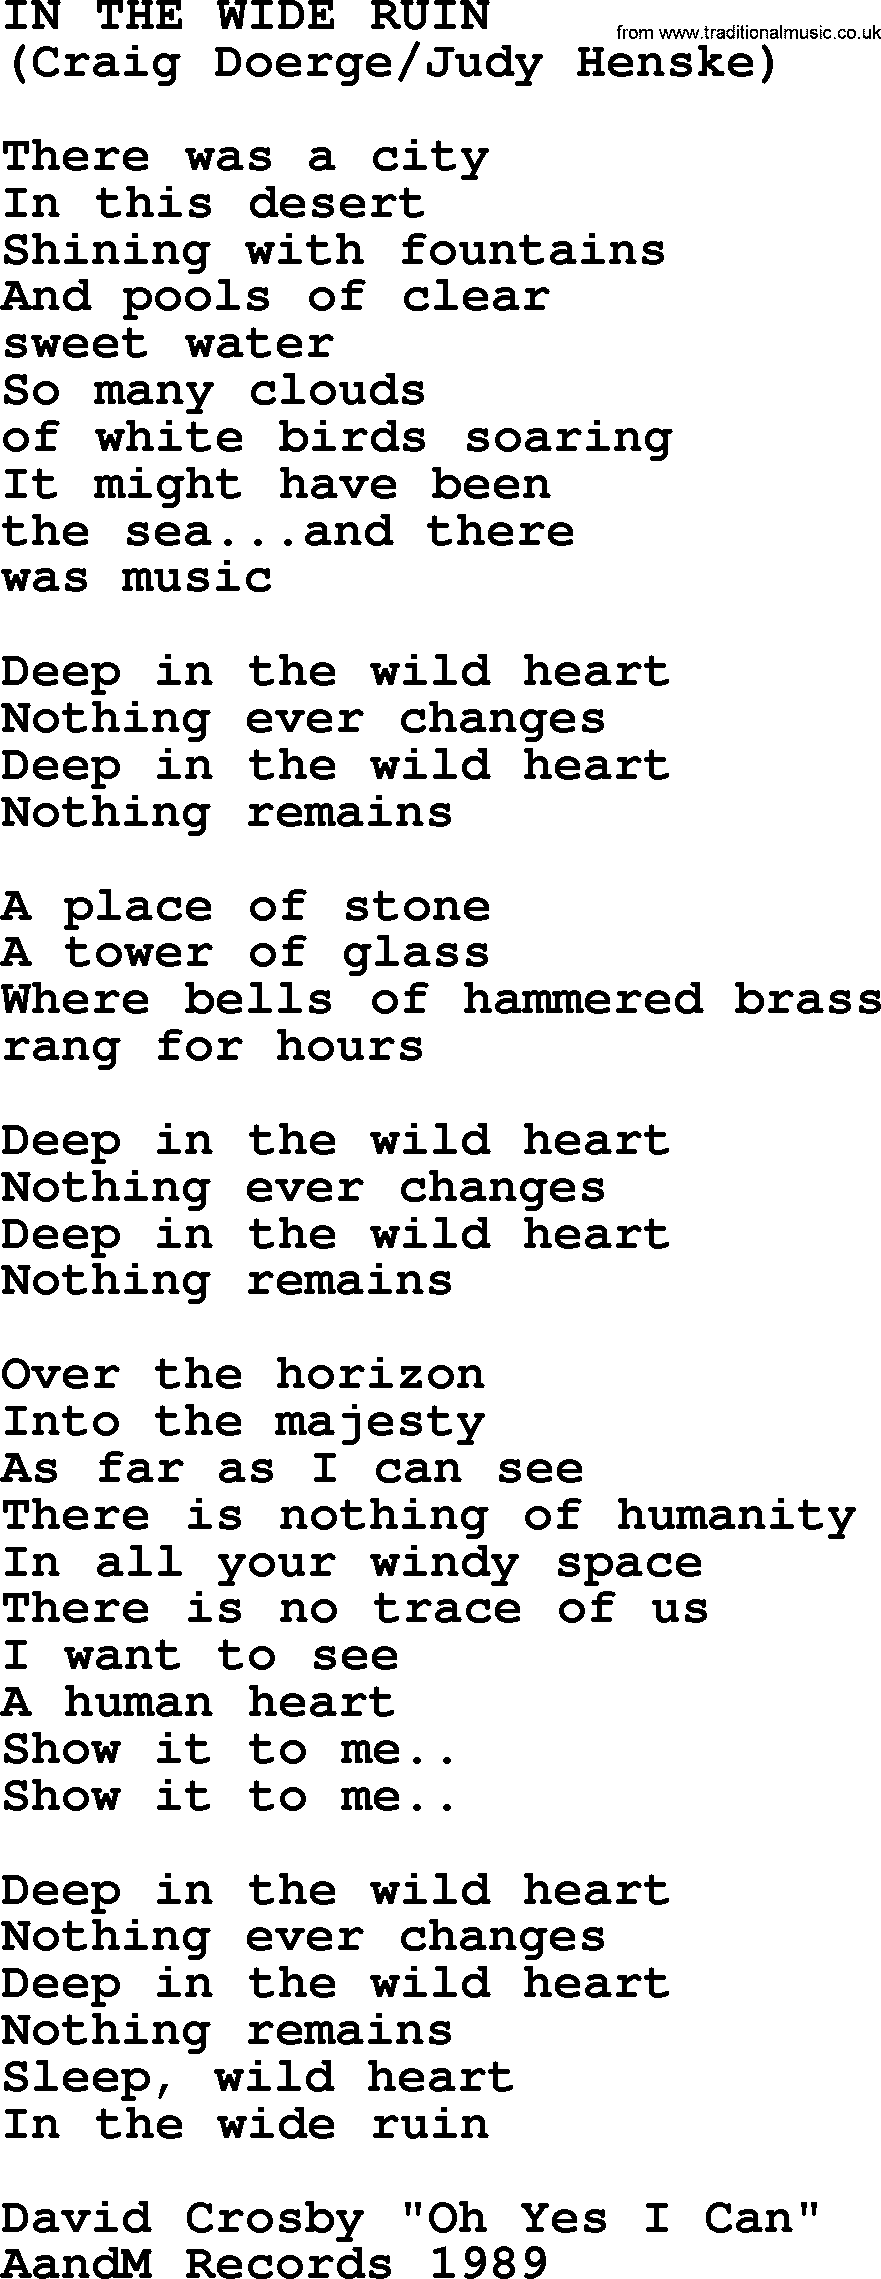 The Byrds song In The Wide Ruin, lyrics